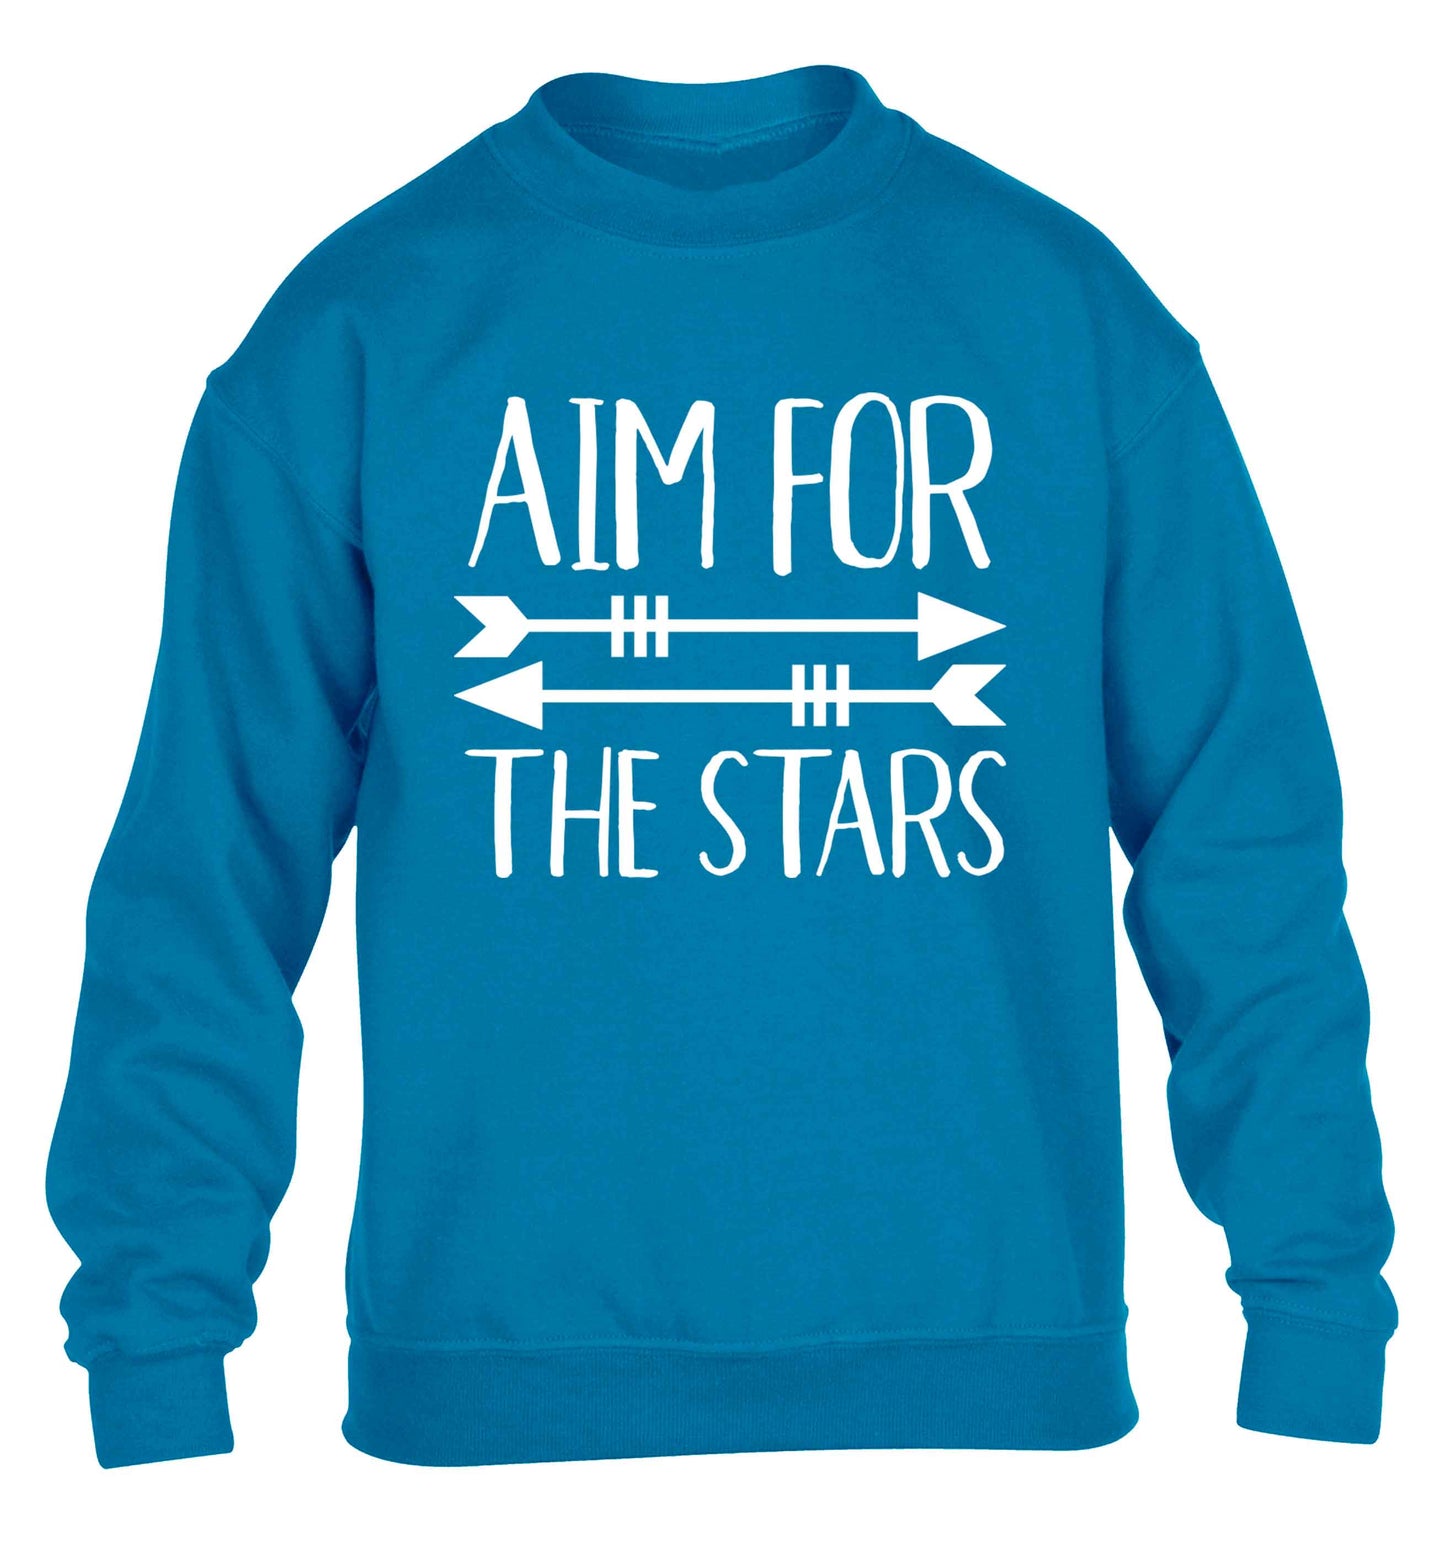 Aim for the stars children's blue sweater 12-13 Years